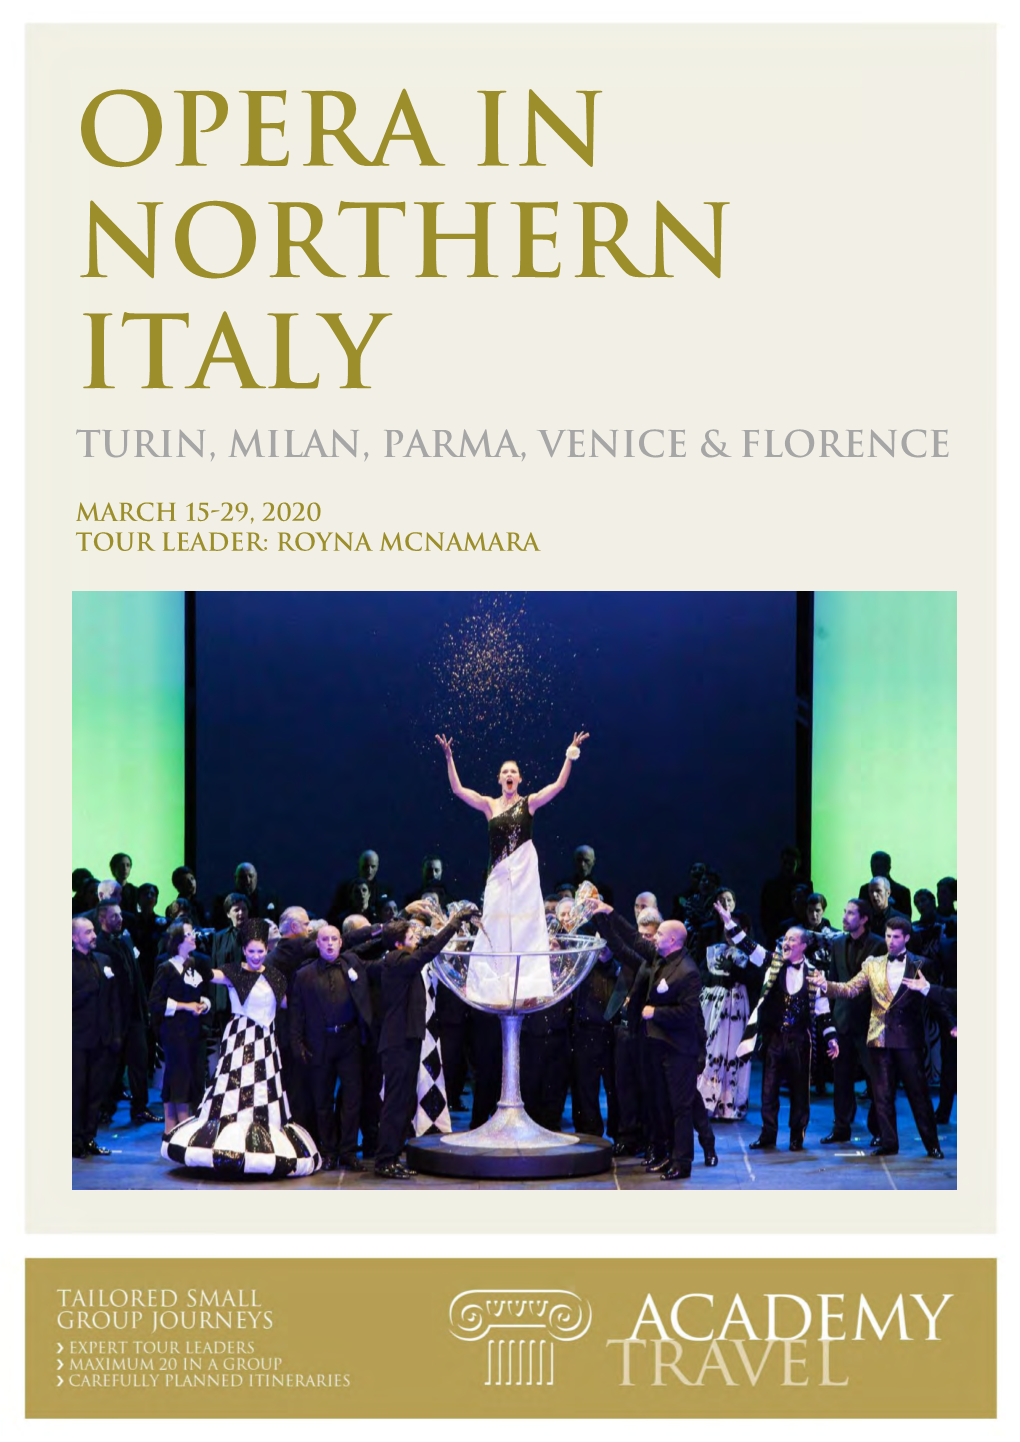 Opera in Northern Italy Turin, Milan, Parma, Venice & Florence